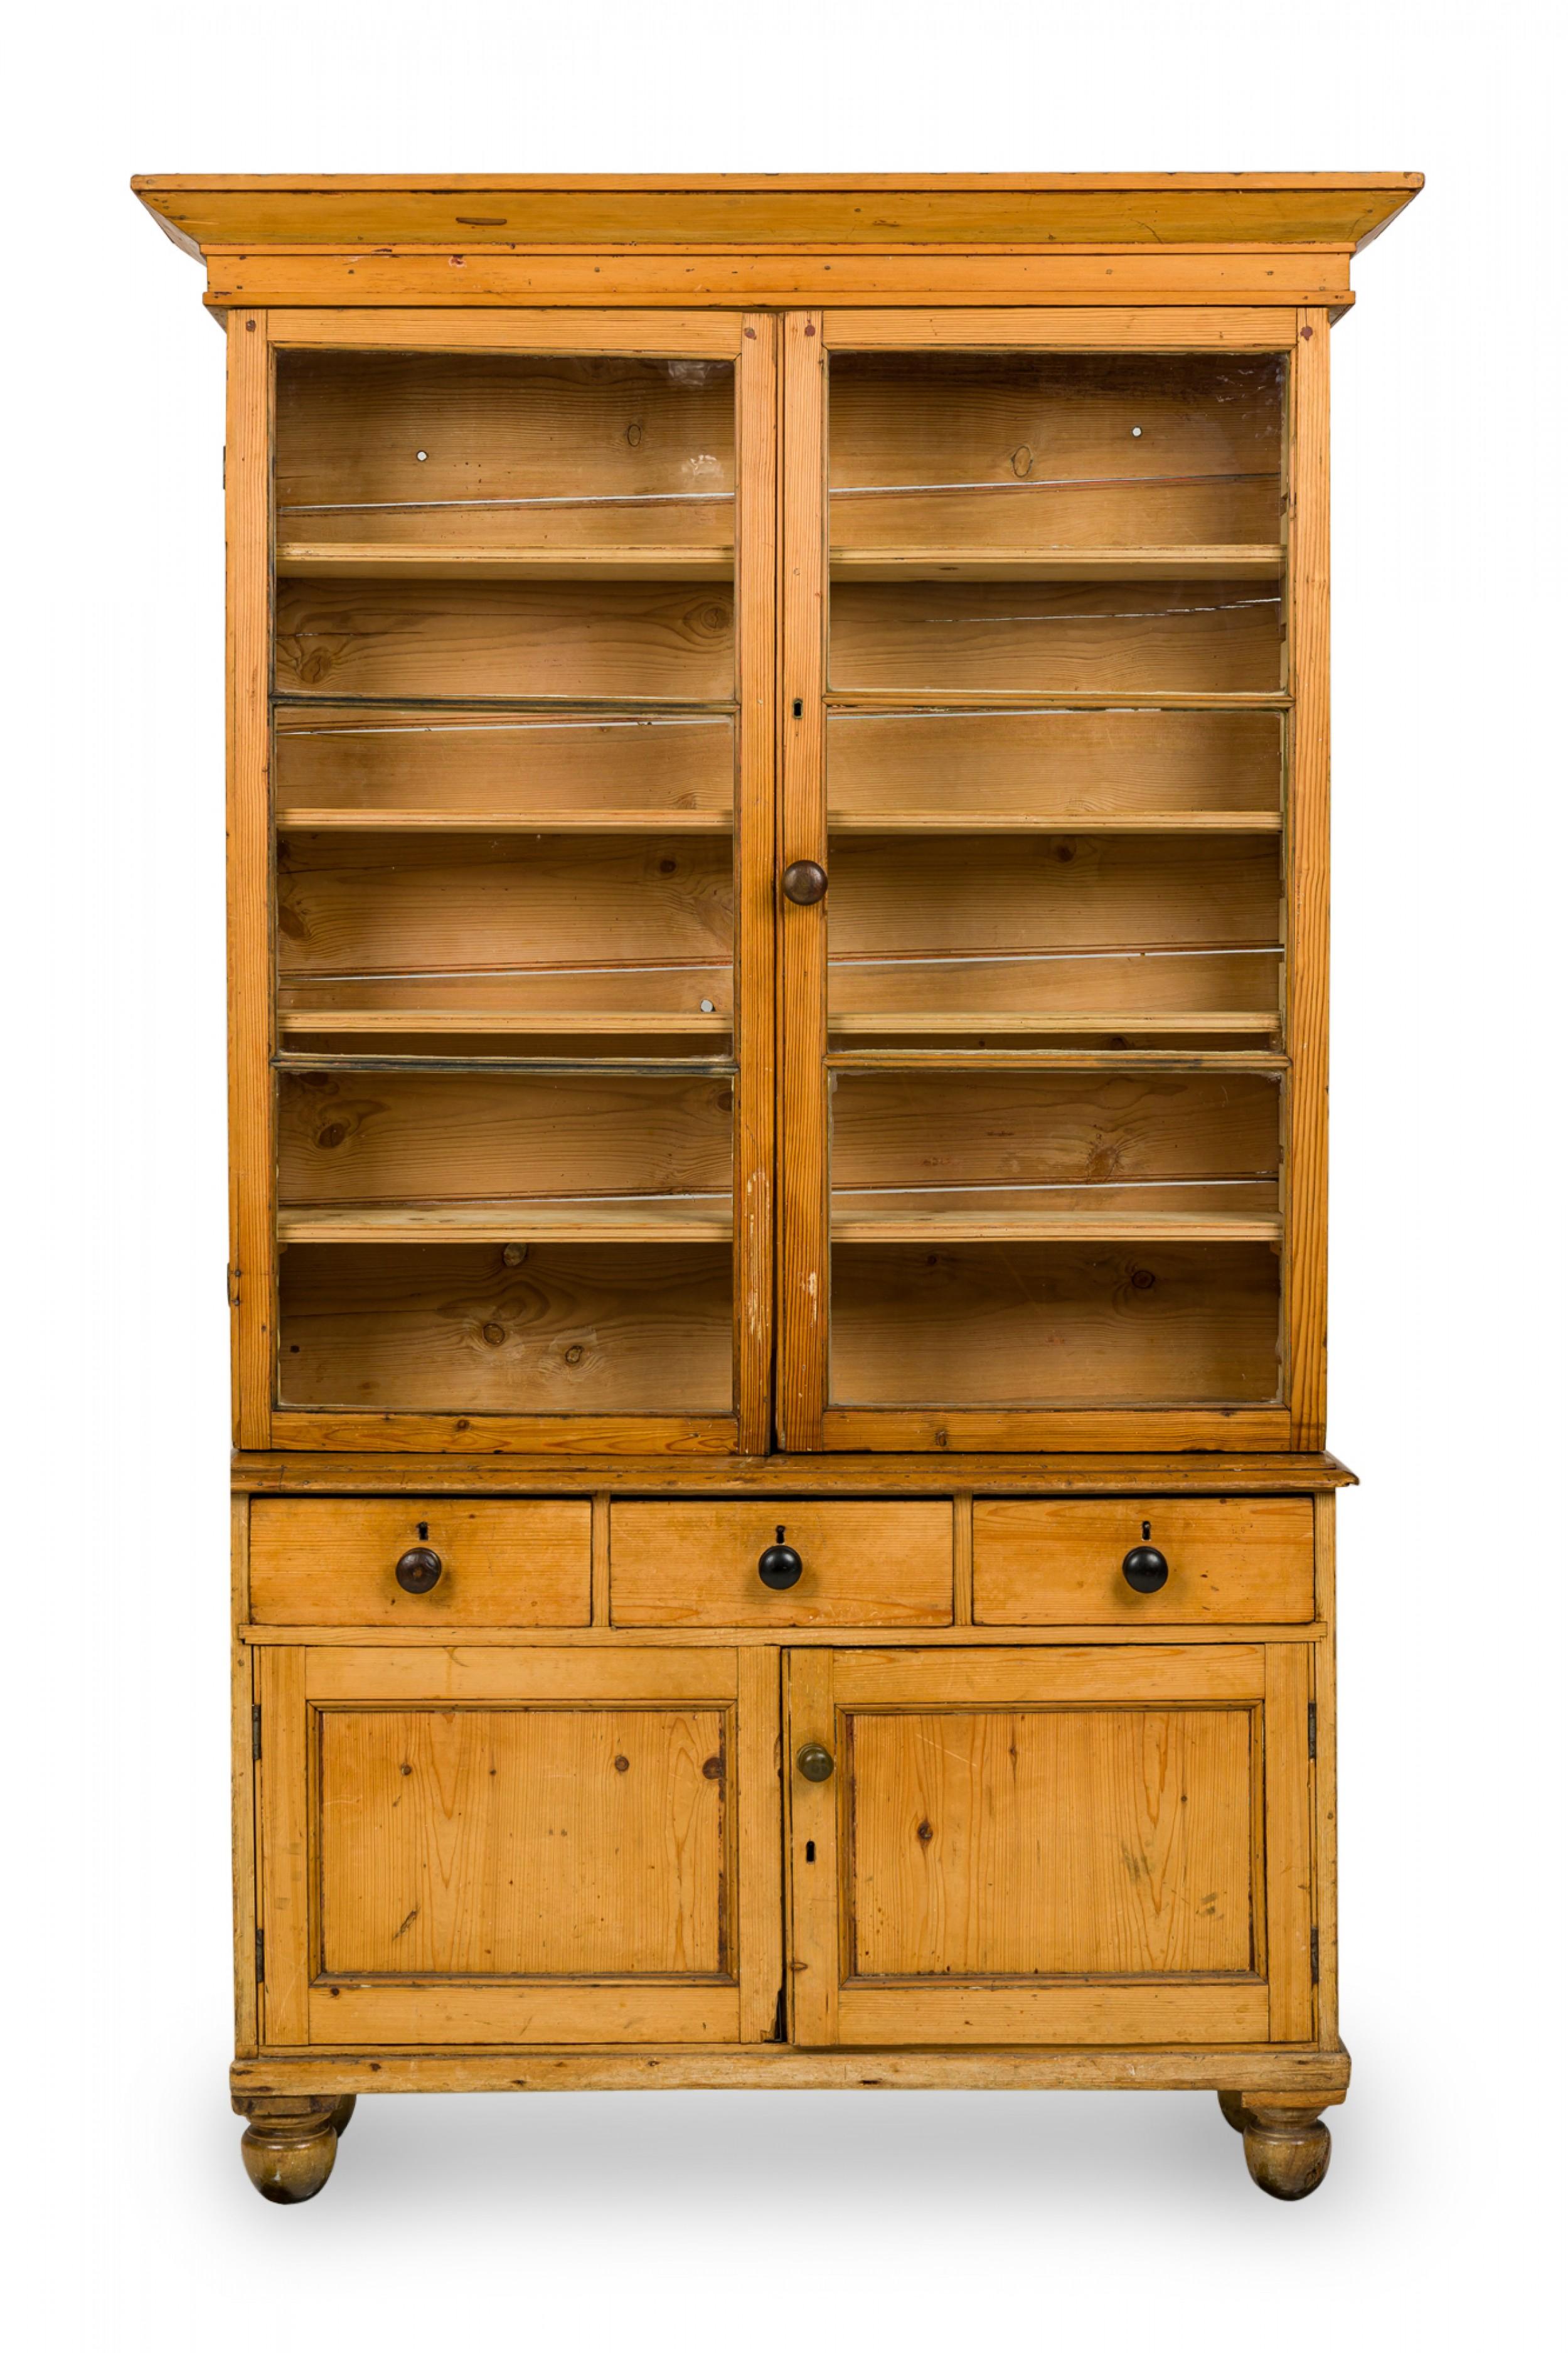 English Country-style hutch / cabinet with a pine wood case, pediment top, upper breakfront cabinet section with glass doors and four shelves above a lower enclosed base containing three drawers over a two door cabinet containing a dividing shelf,